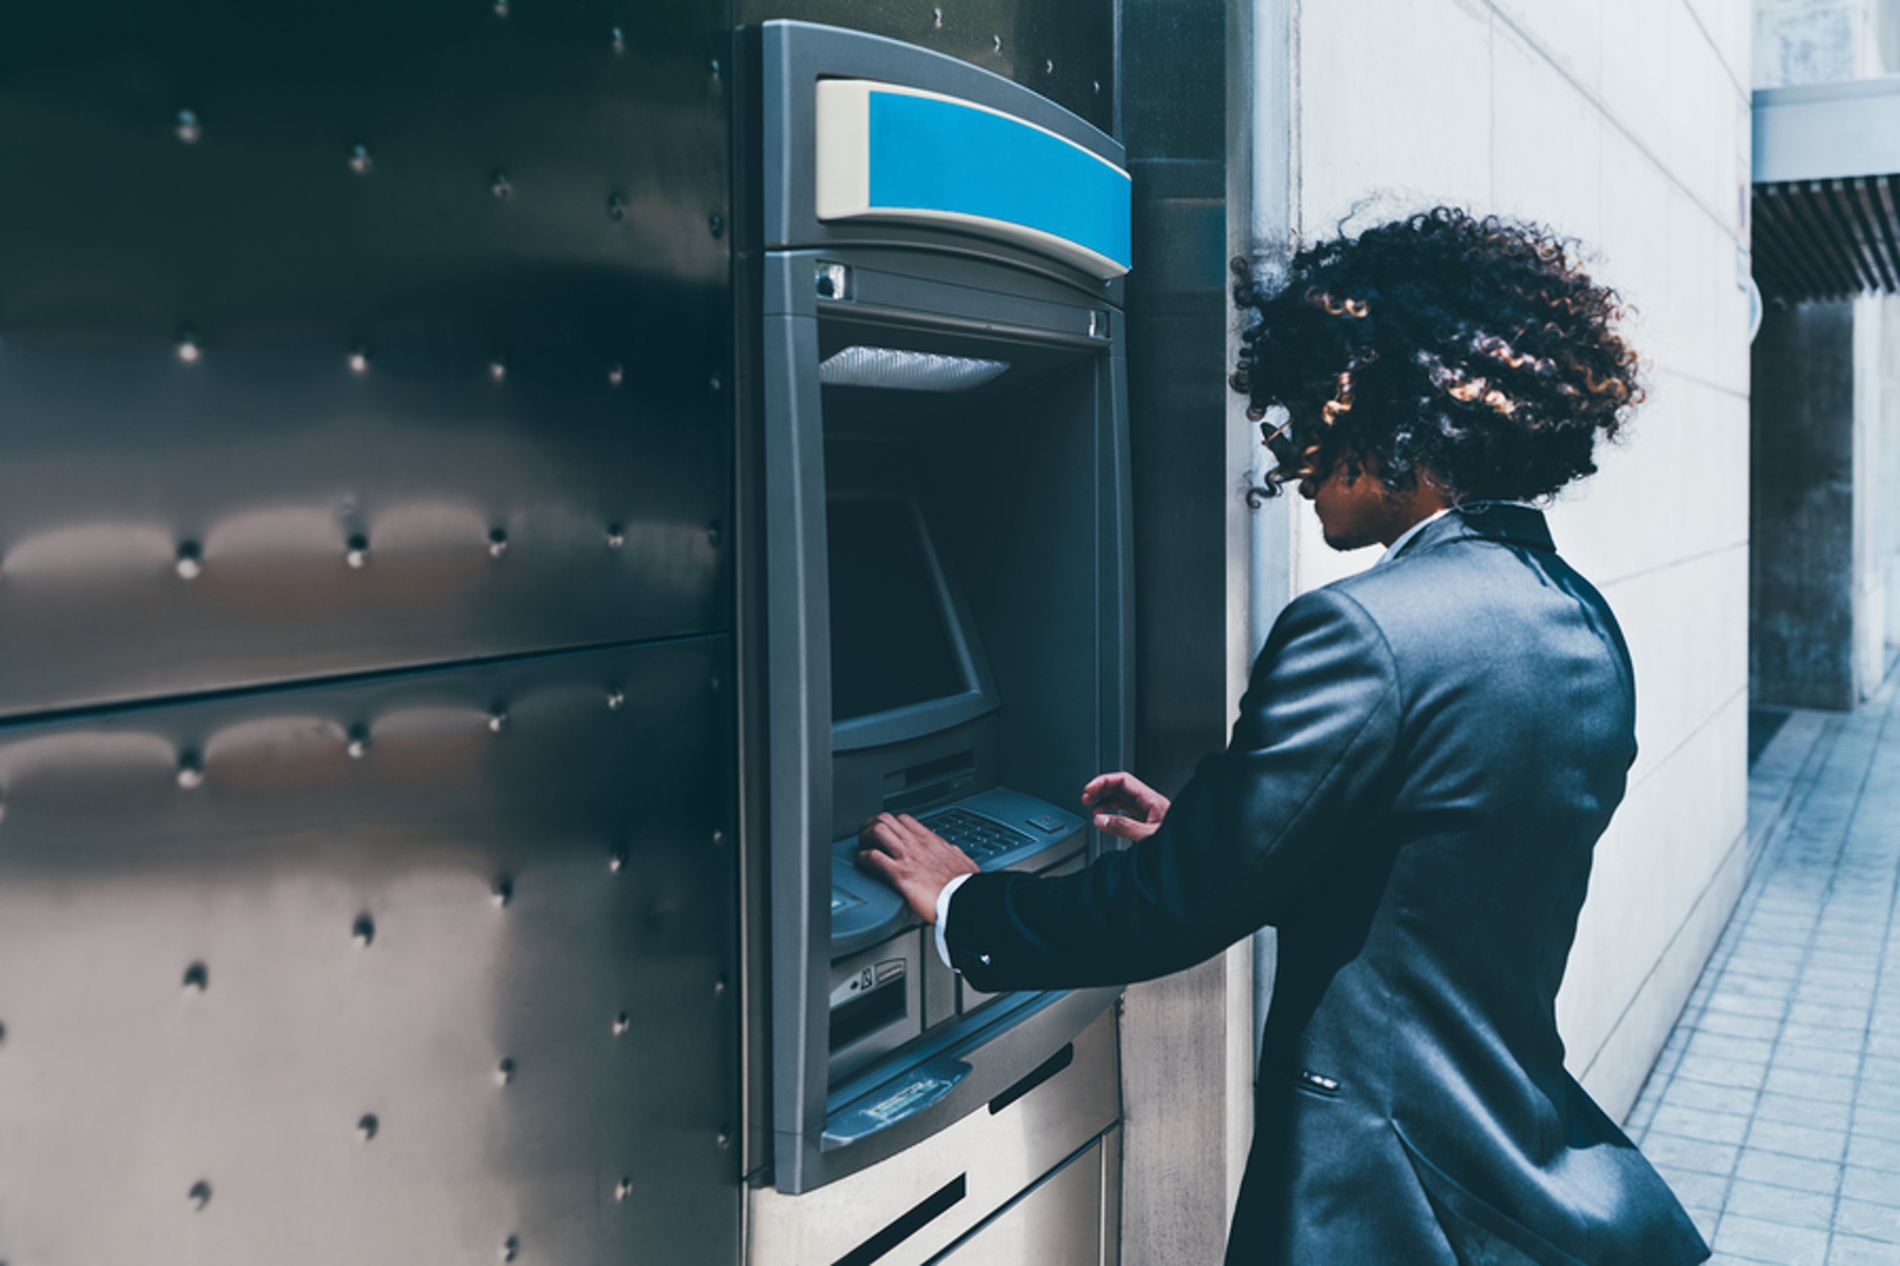 Woman operating an ATM.